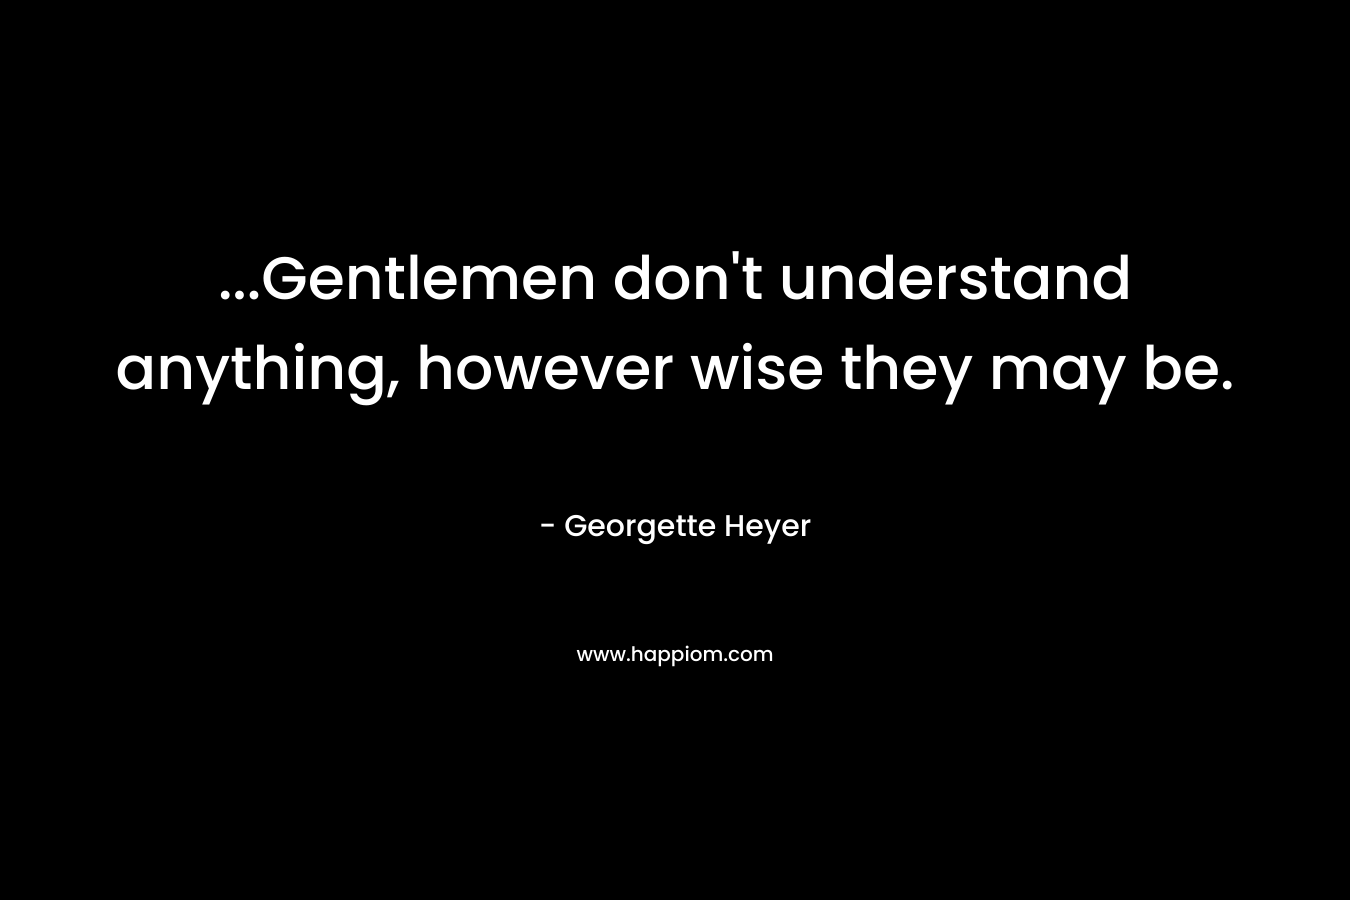 ...Gentlemen don't understand anything, however wise they may be.